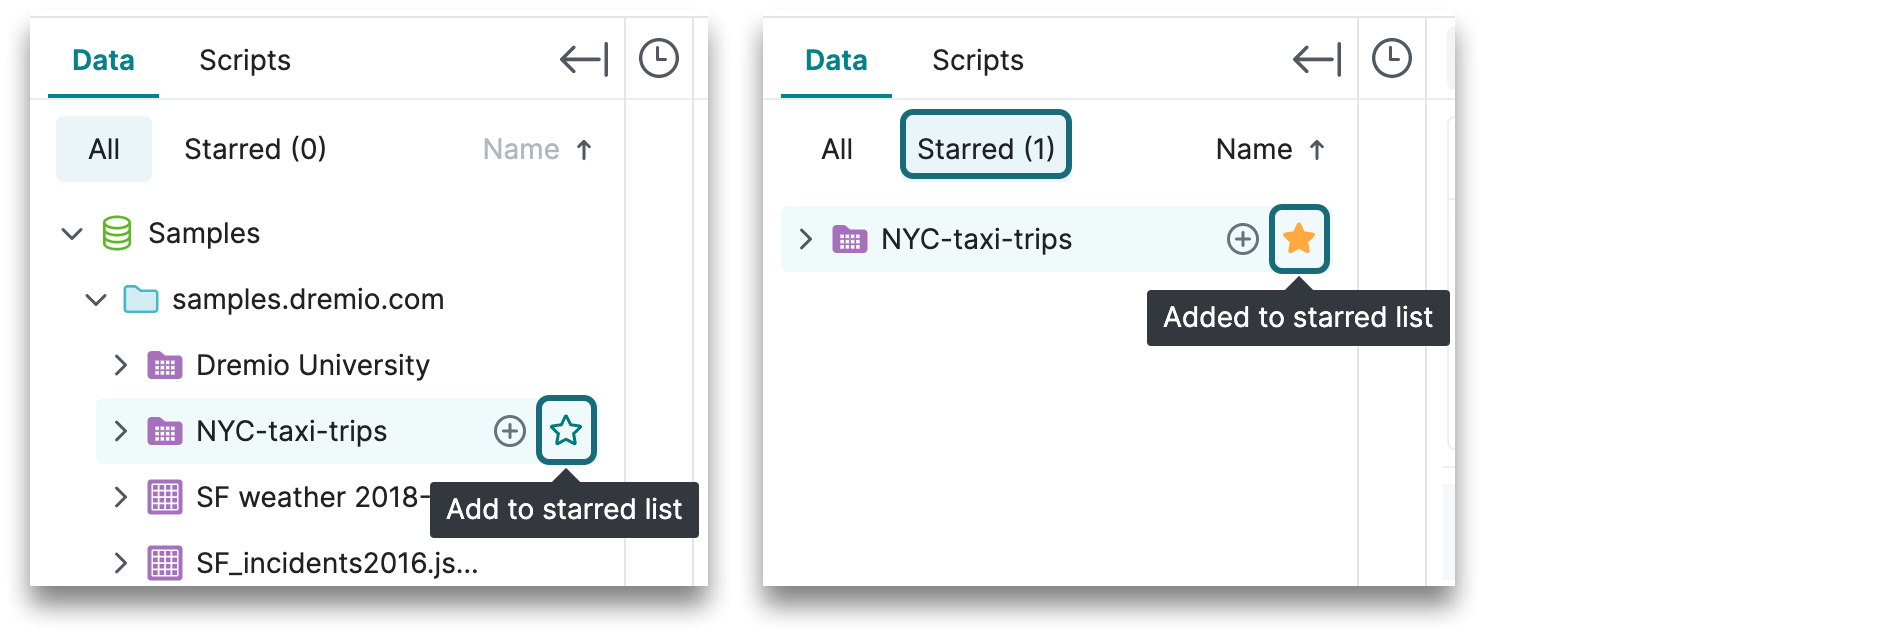 This is a screenshot showing how to star a dataset for the Starred list.